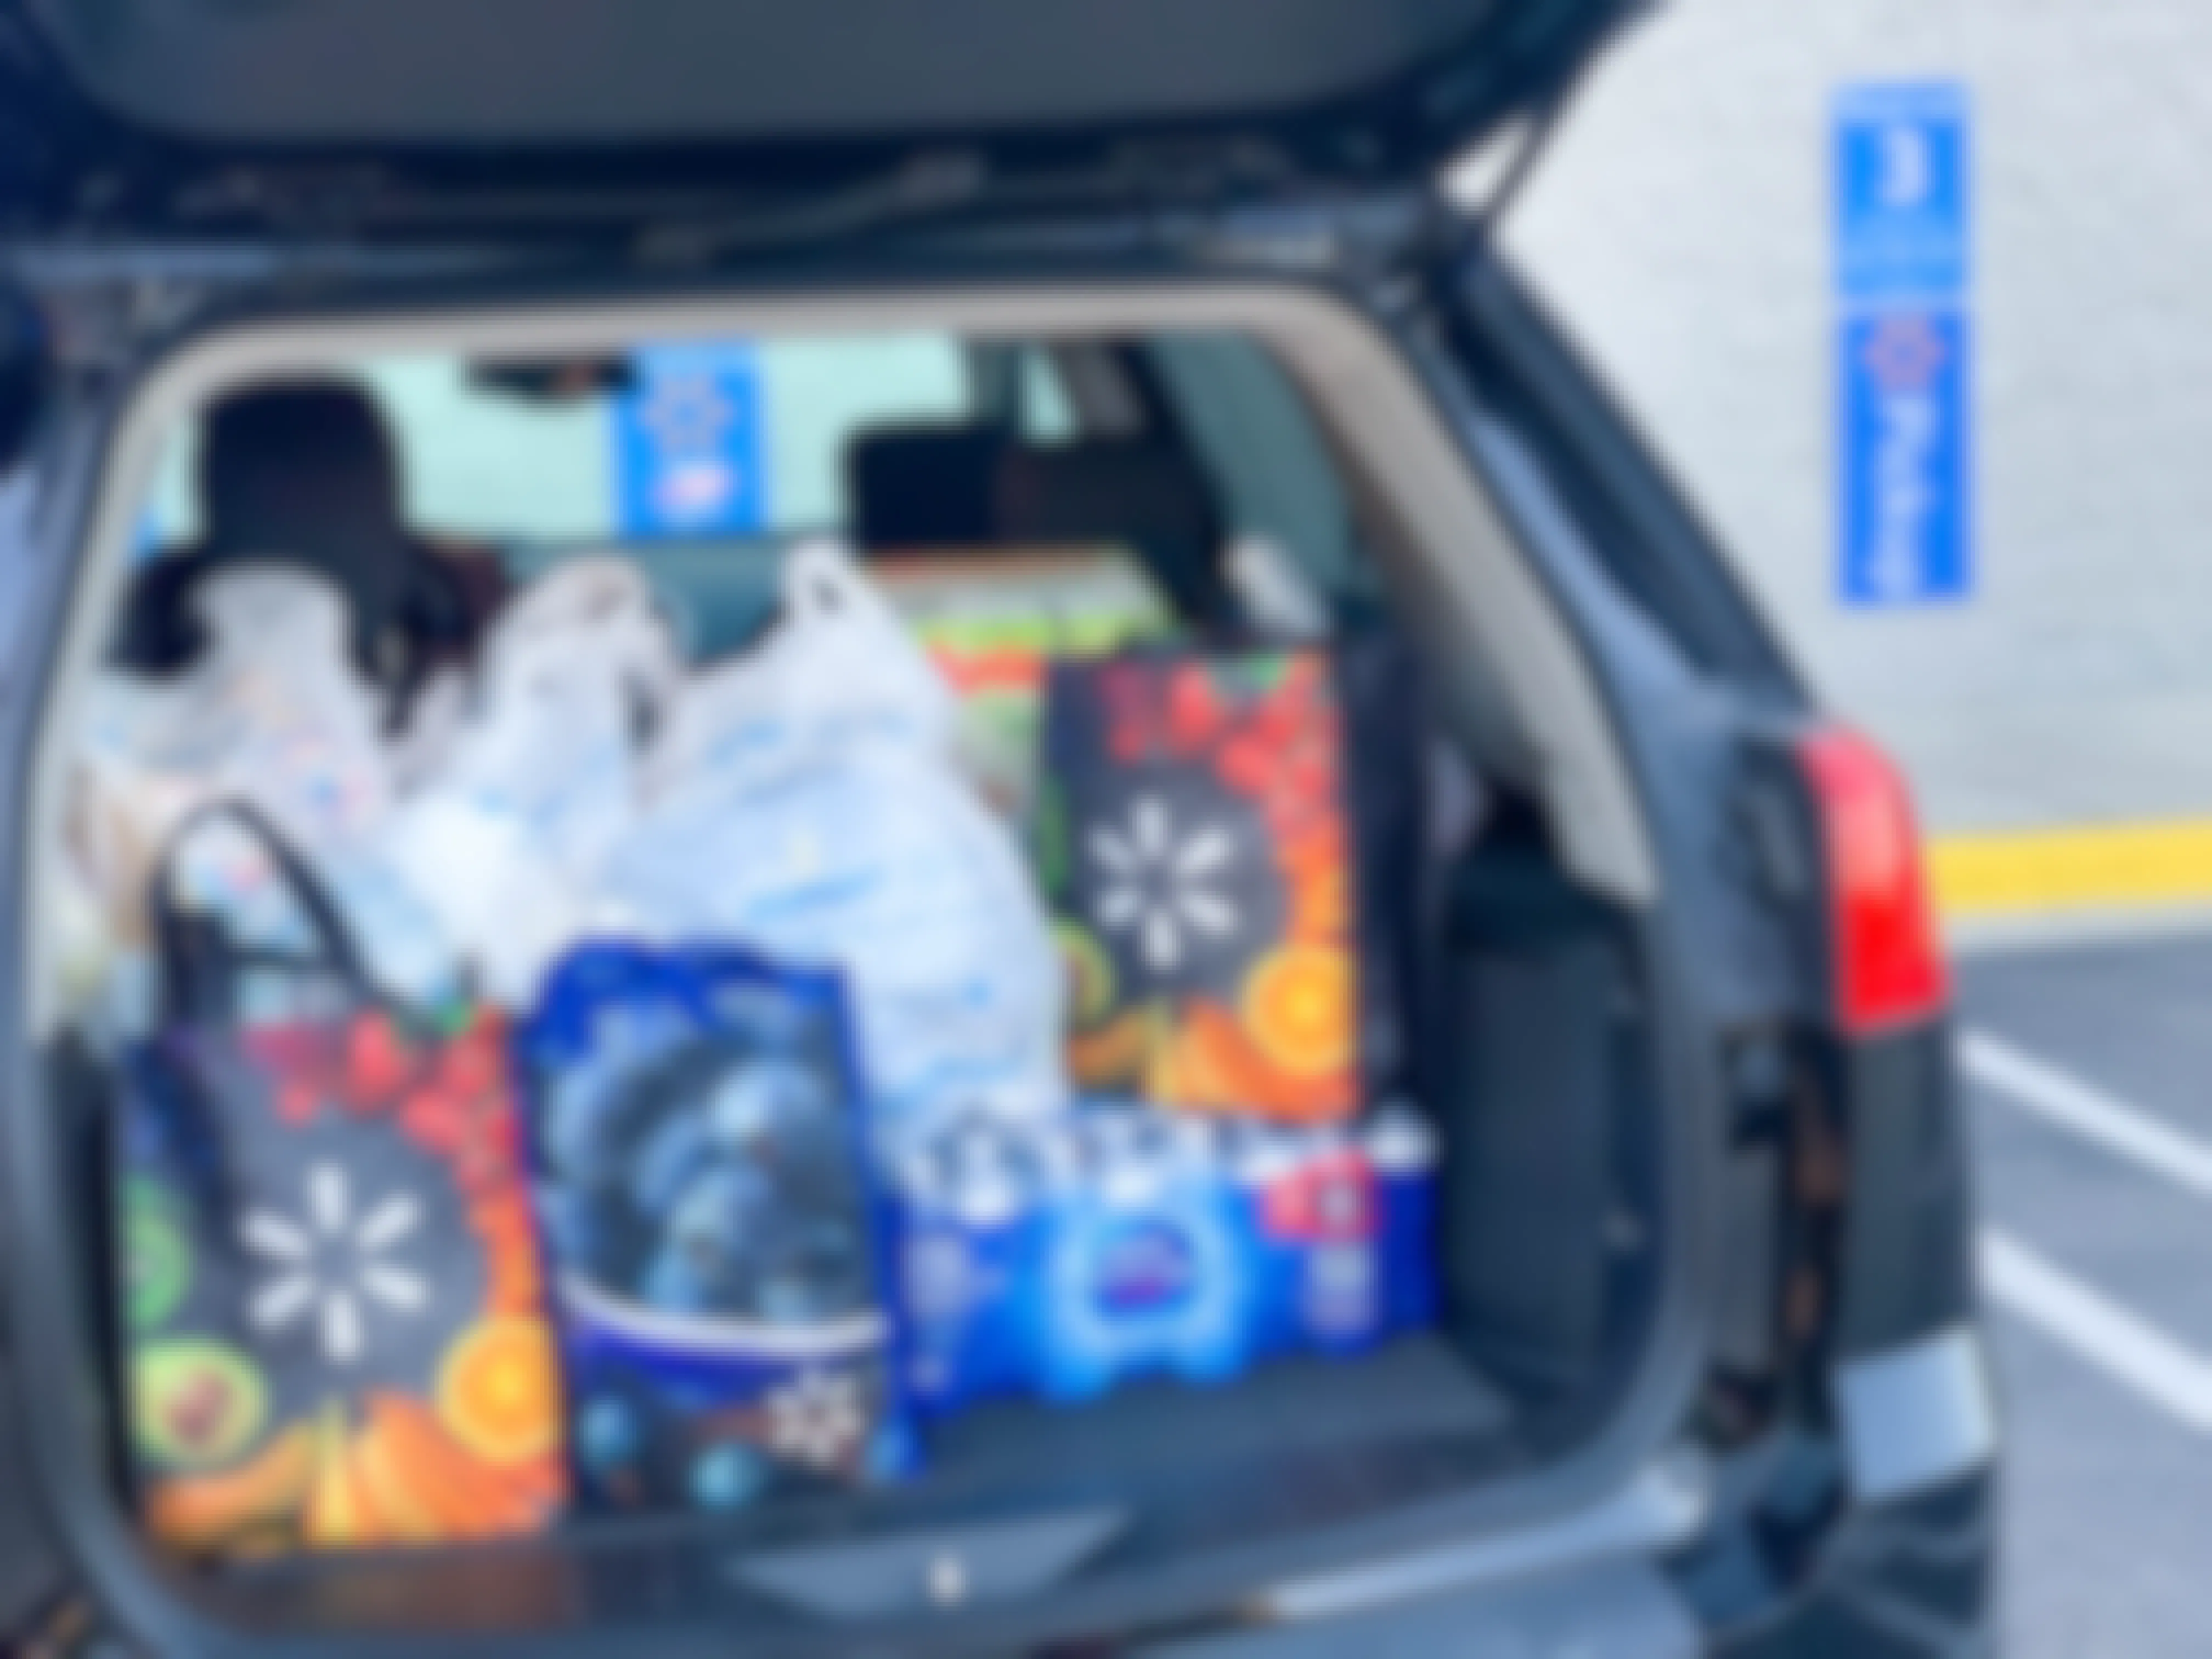 The trunk of a car loaded with Walmart bags during a Walmart curbside pickup